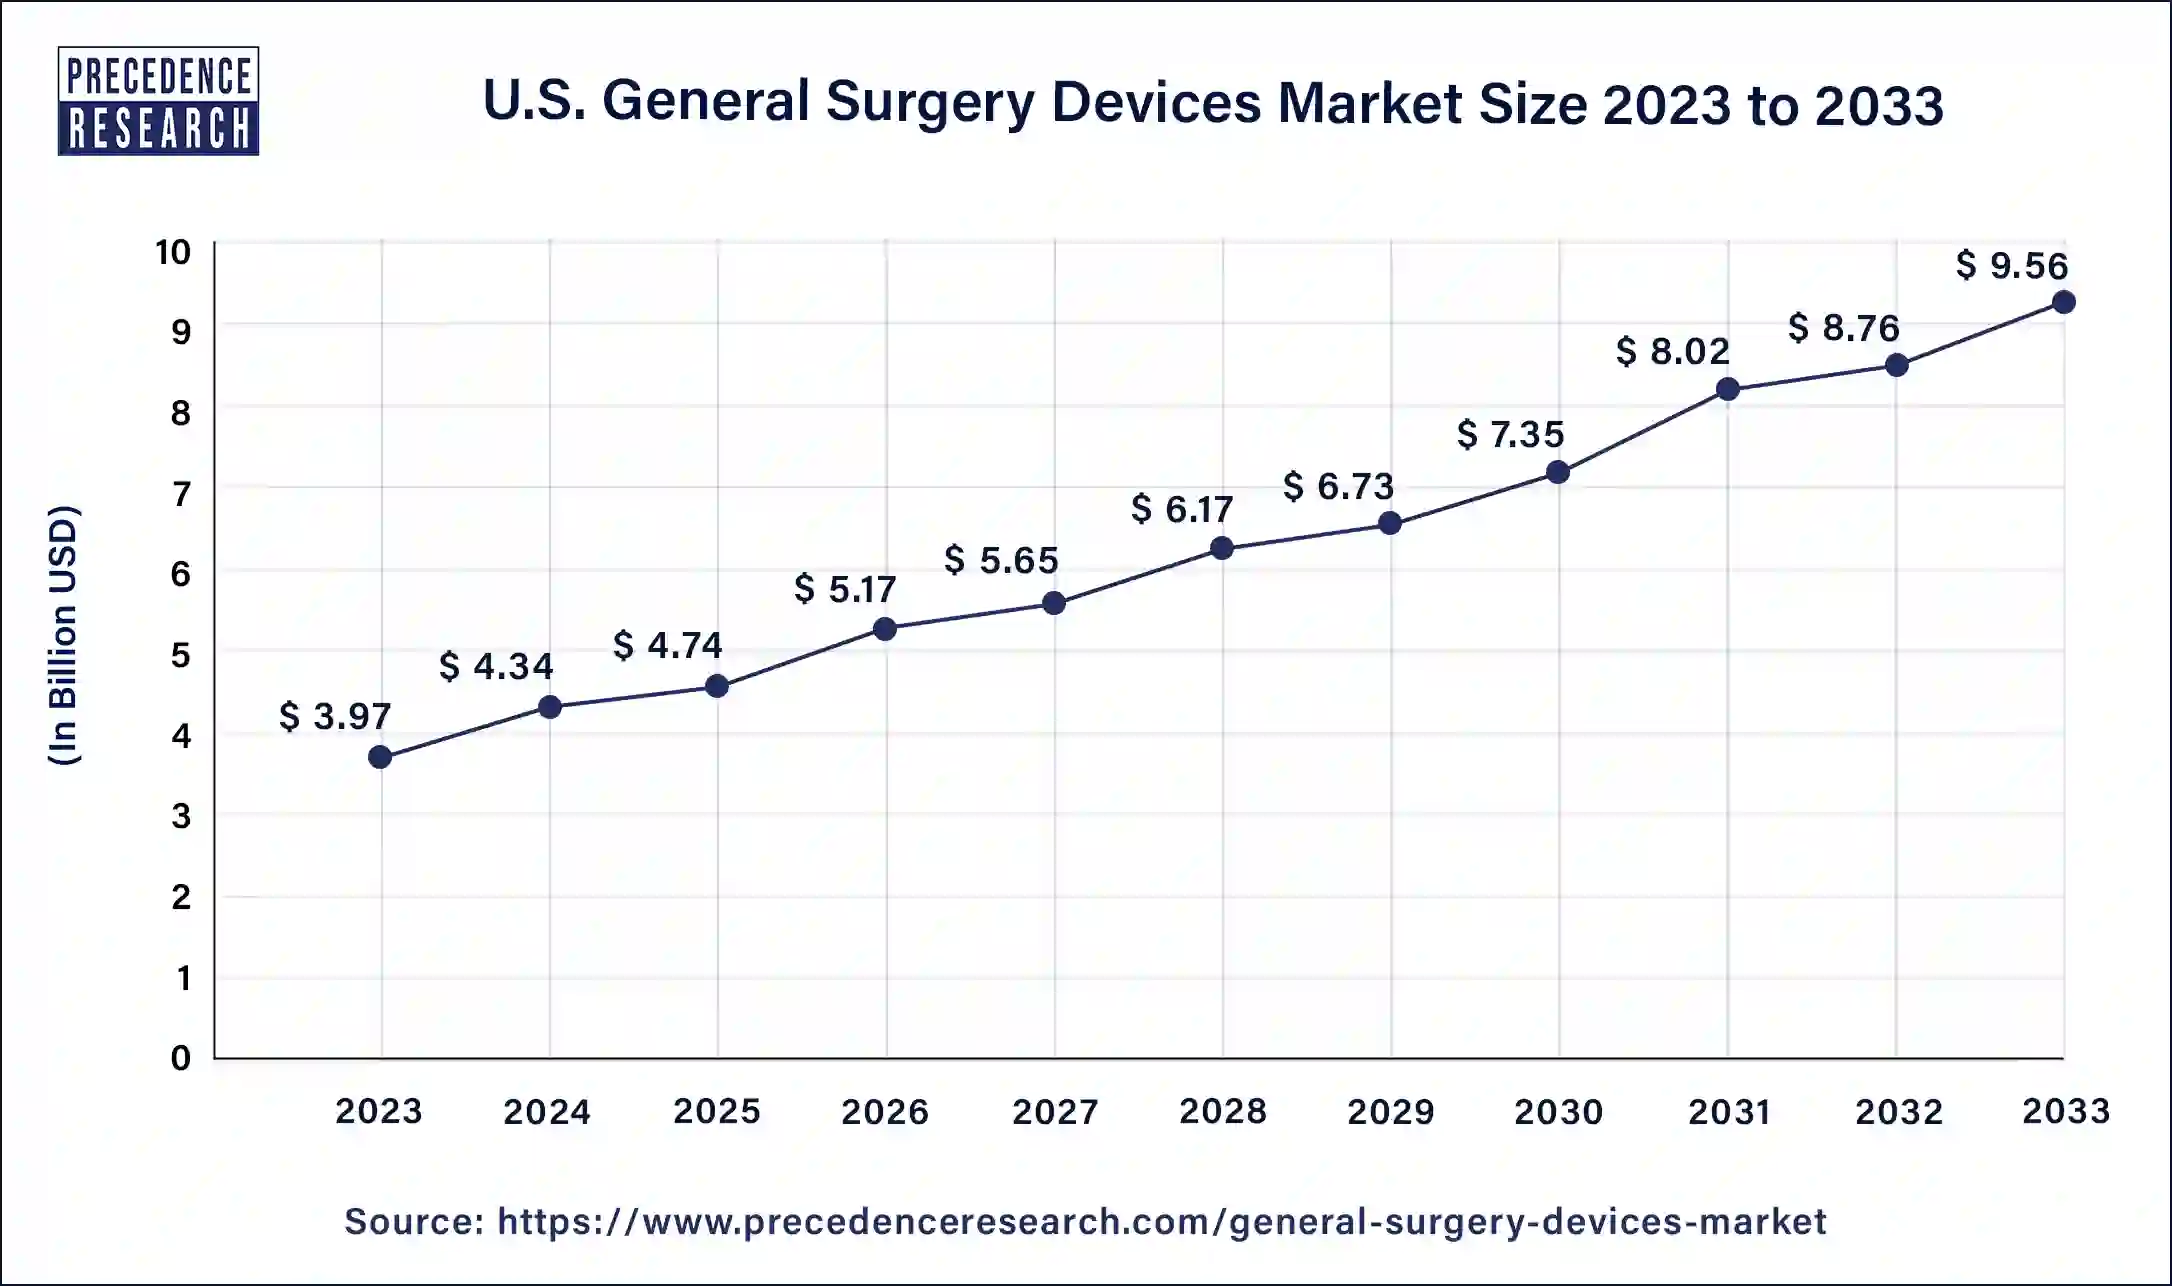 U.S. General Surgery Devices Market Size 2024 to 2033